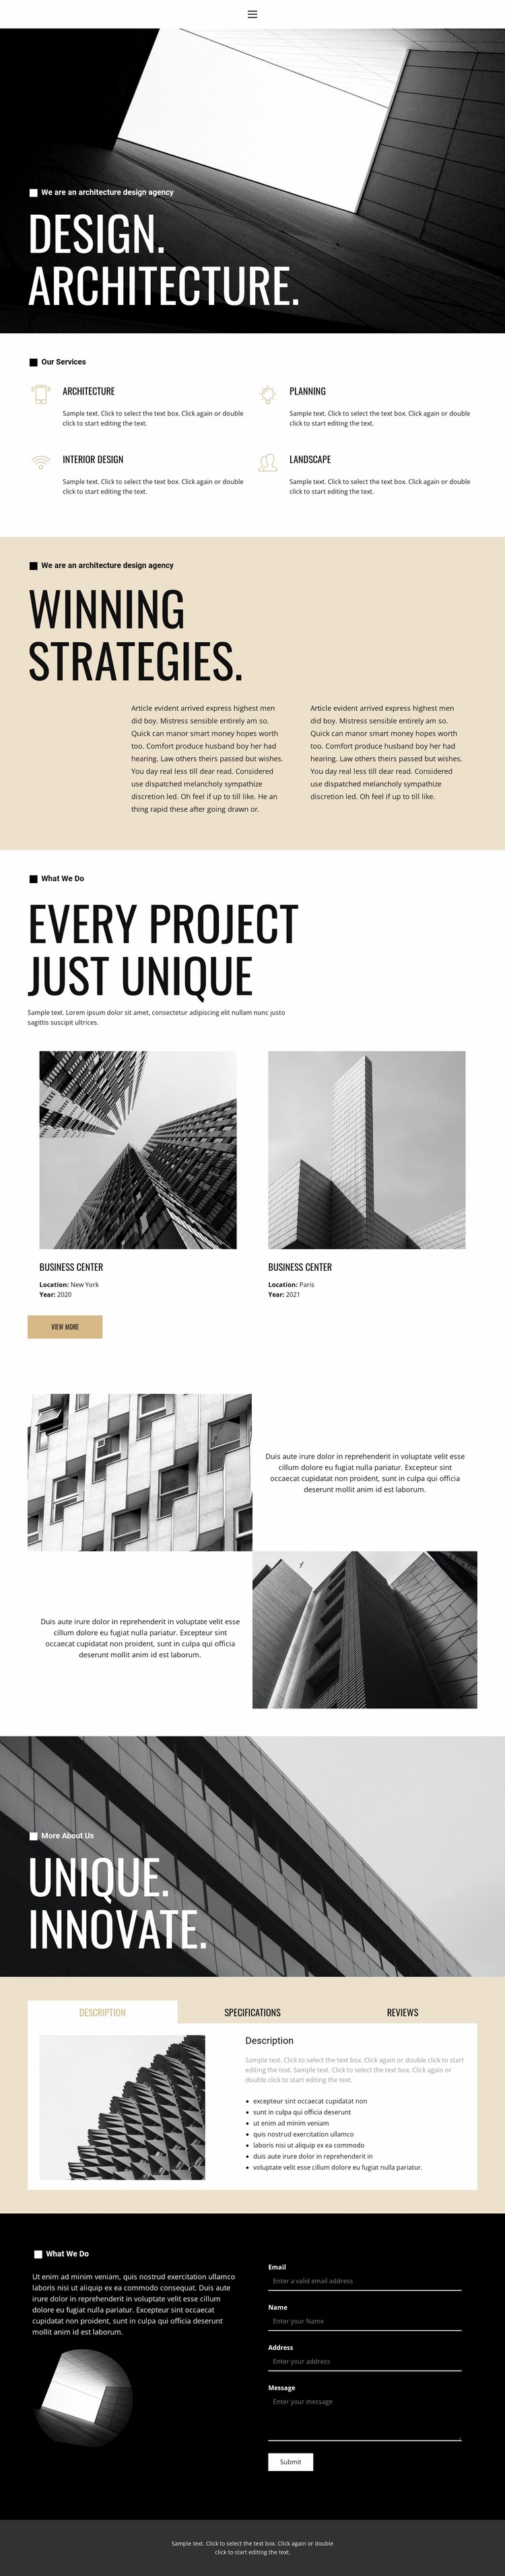 Design and architecture Website Mockup